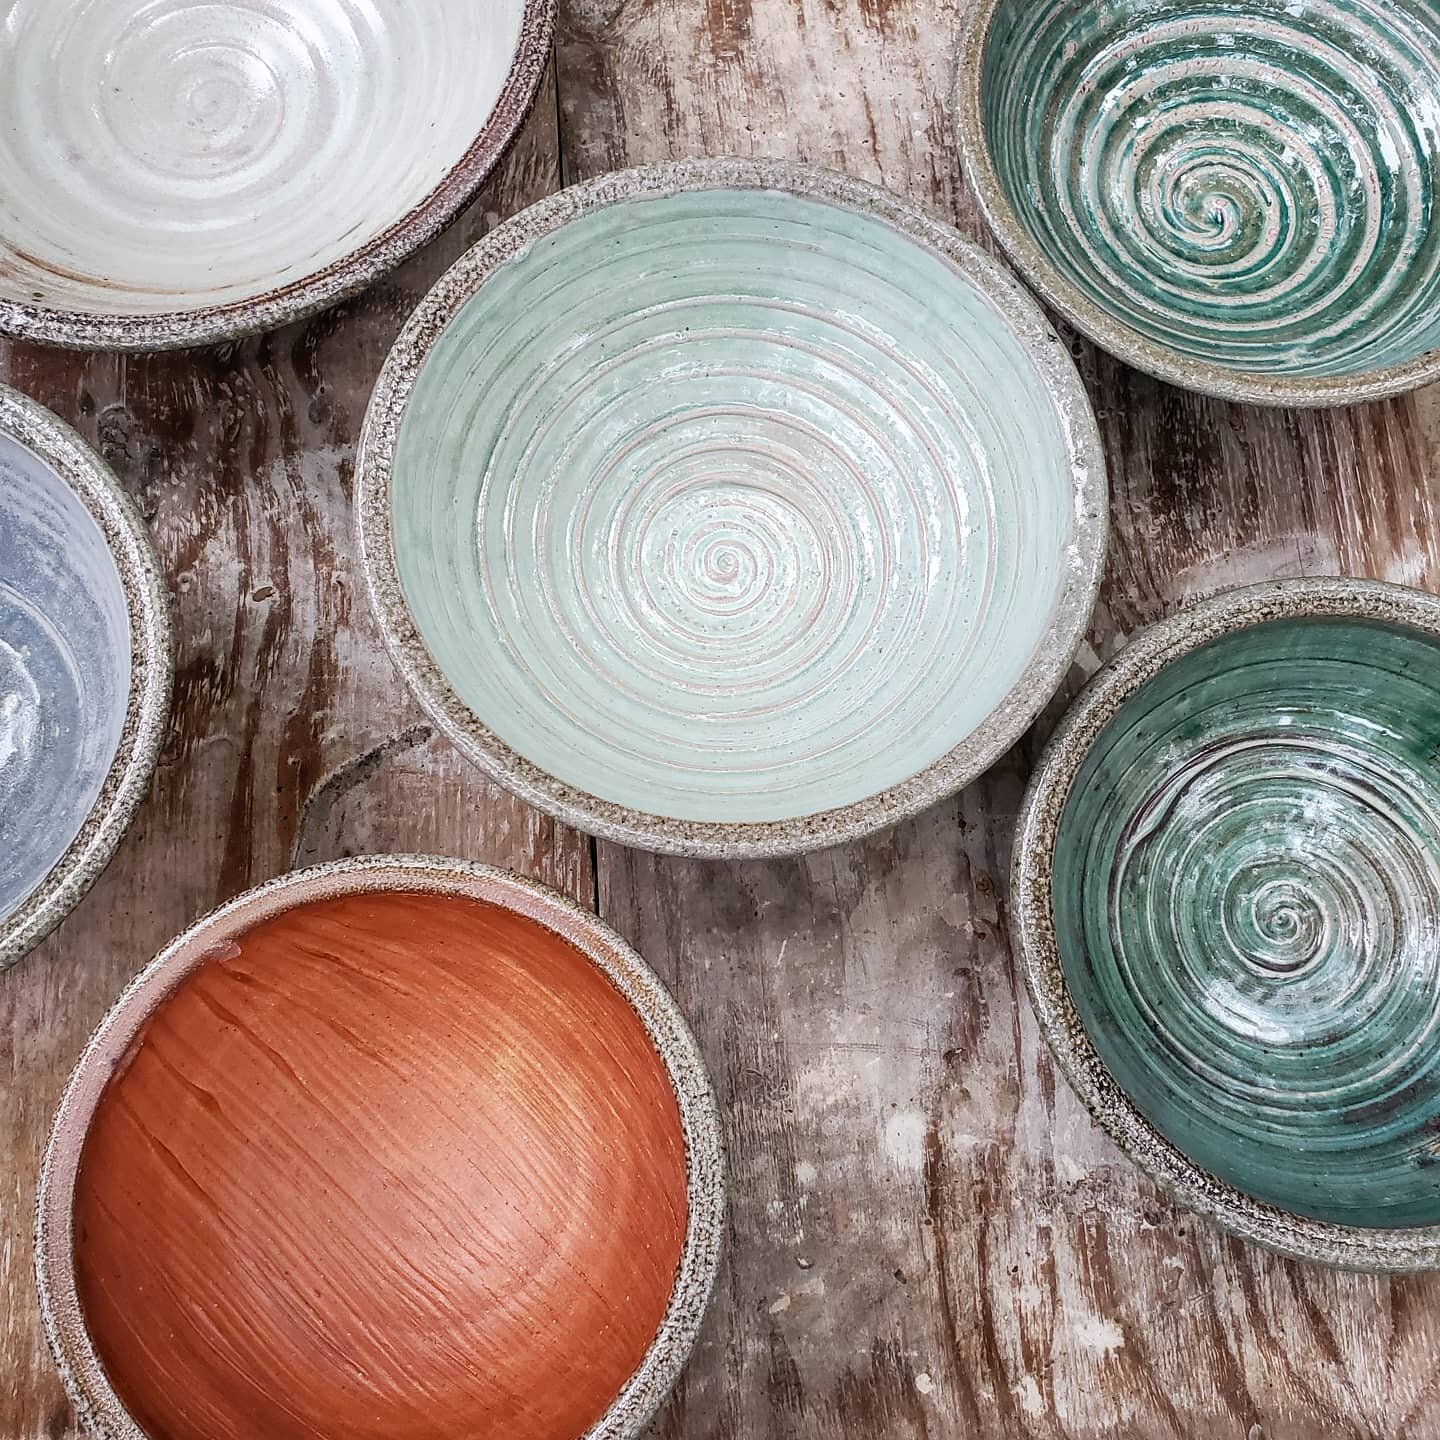 Bowls hot out the kiln.

@throwntogetherpotters #bowl #servingbowl #sodafired #soda #pottery